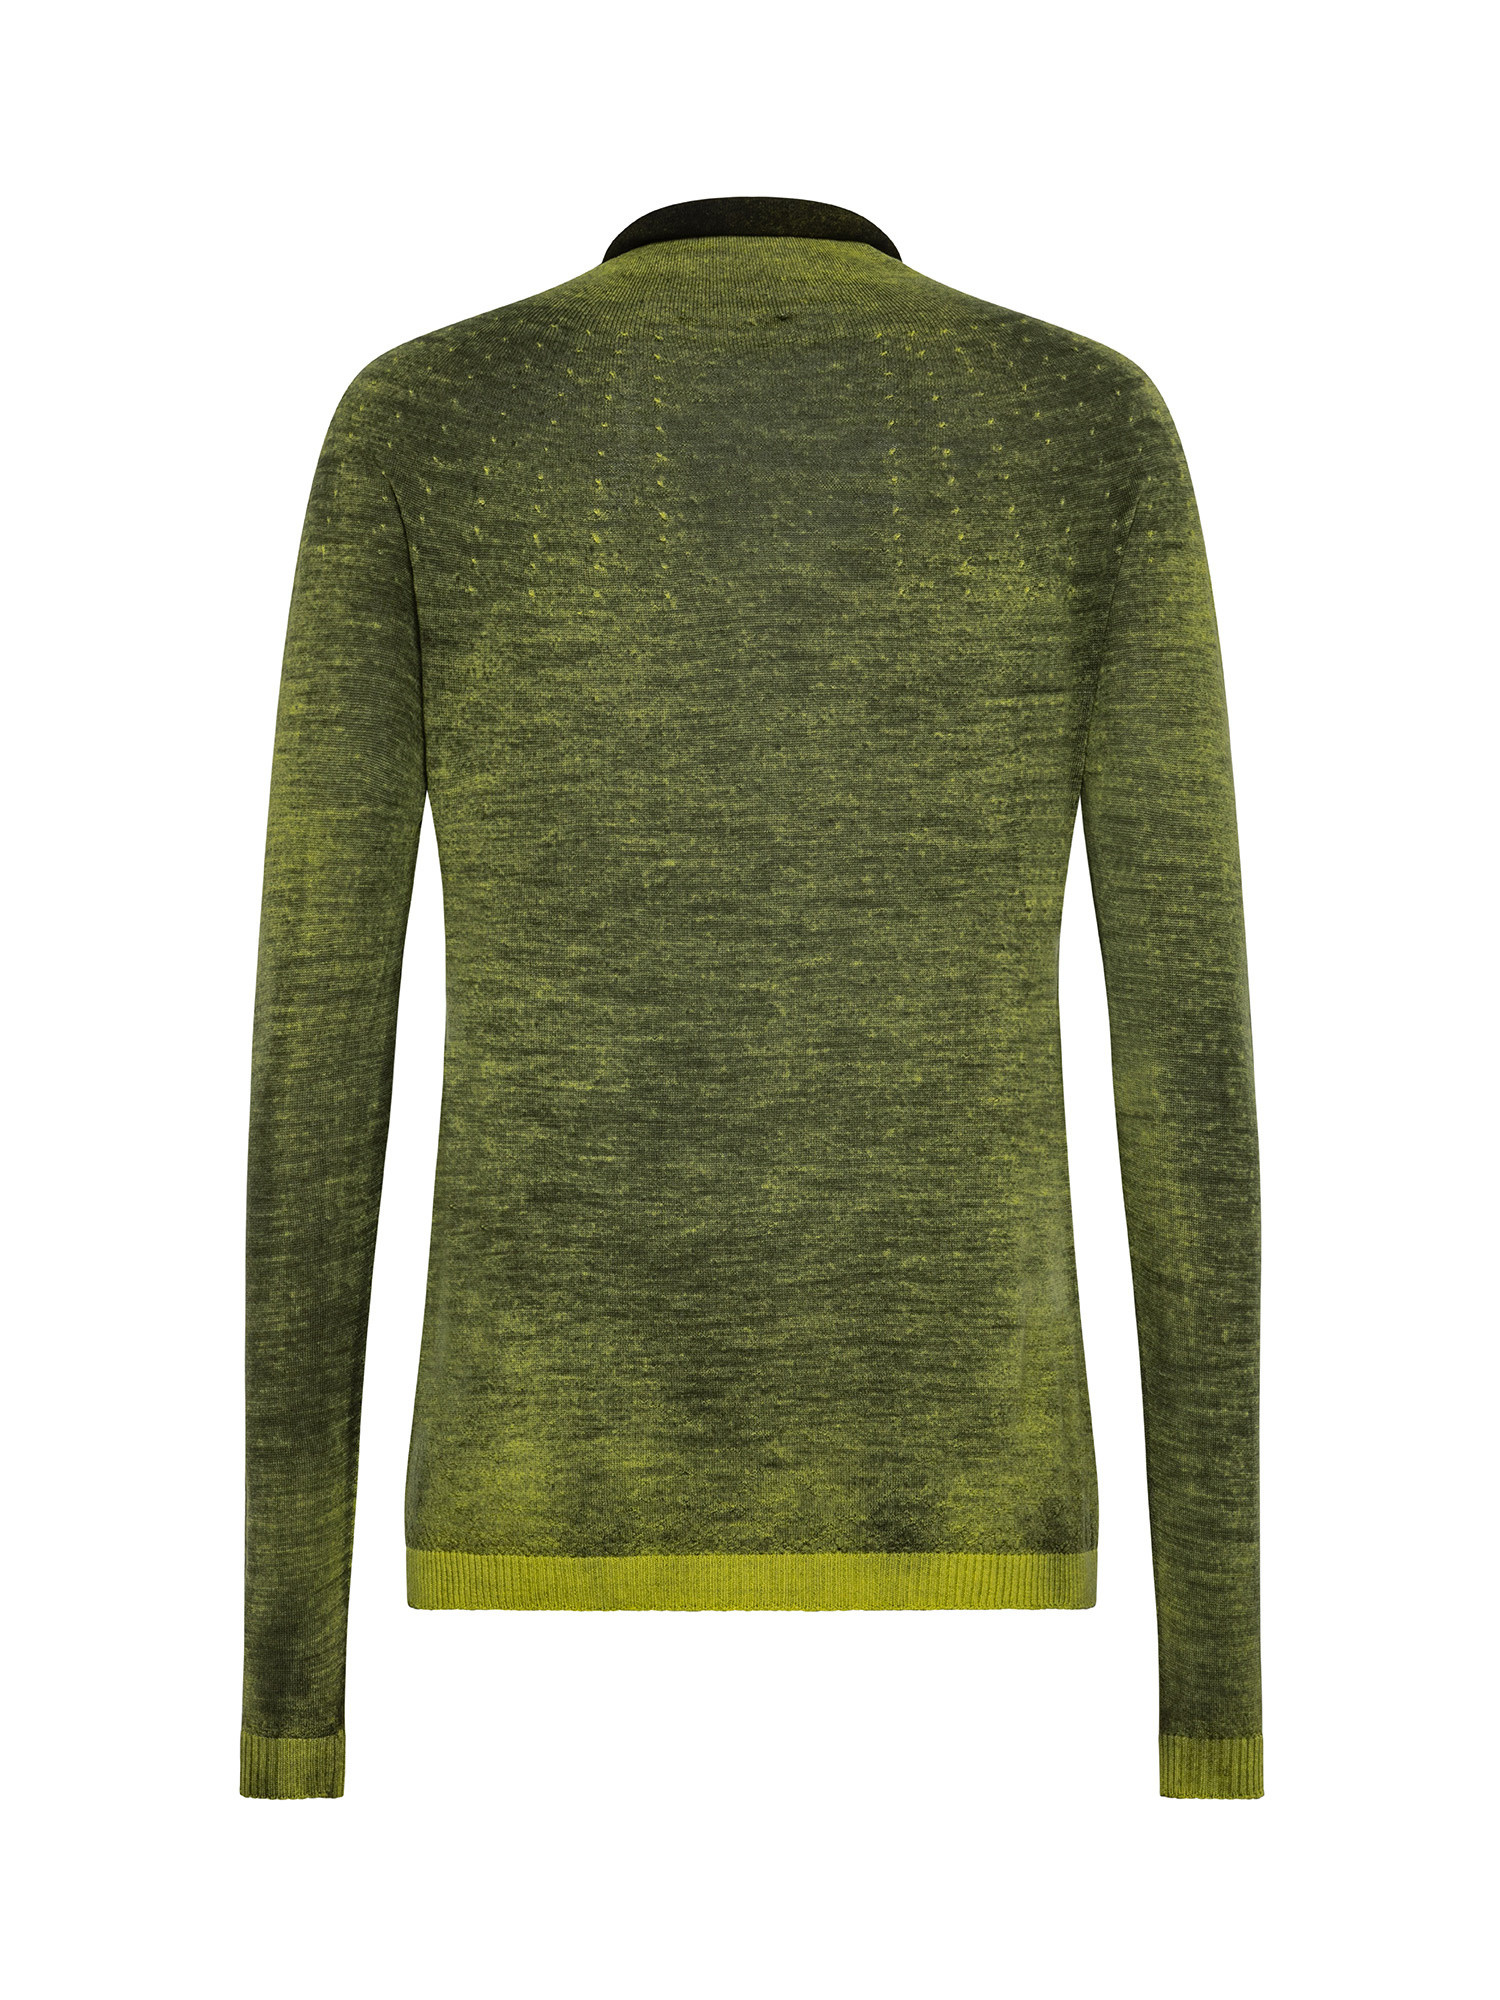 K Collection - Extra fine wool sweater, Green, large image number 1